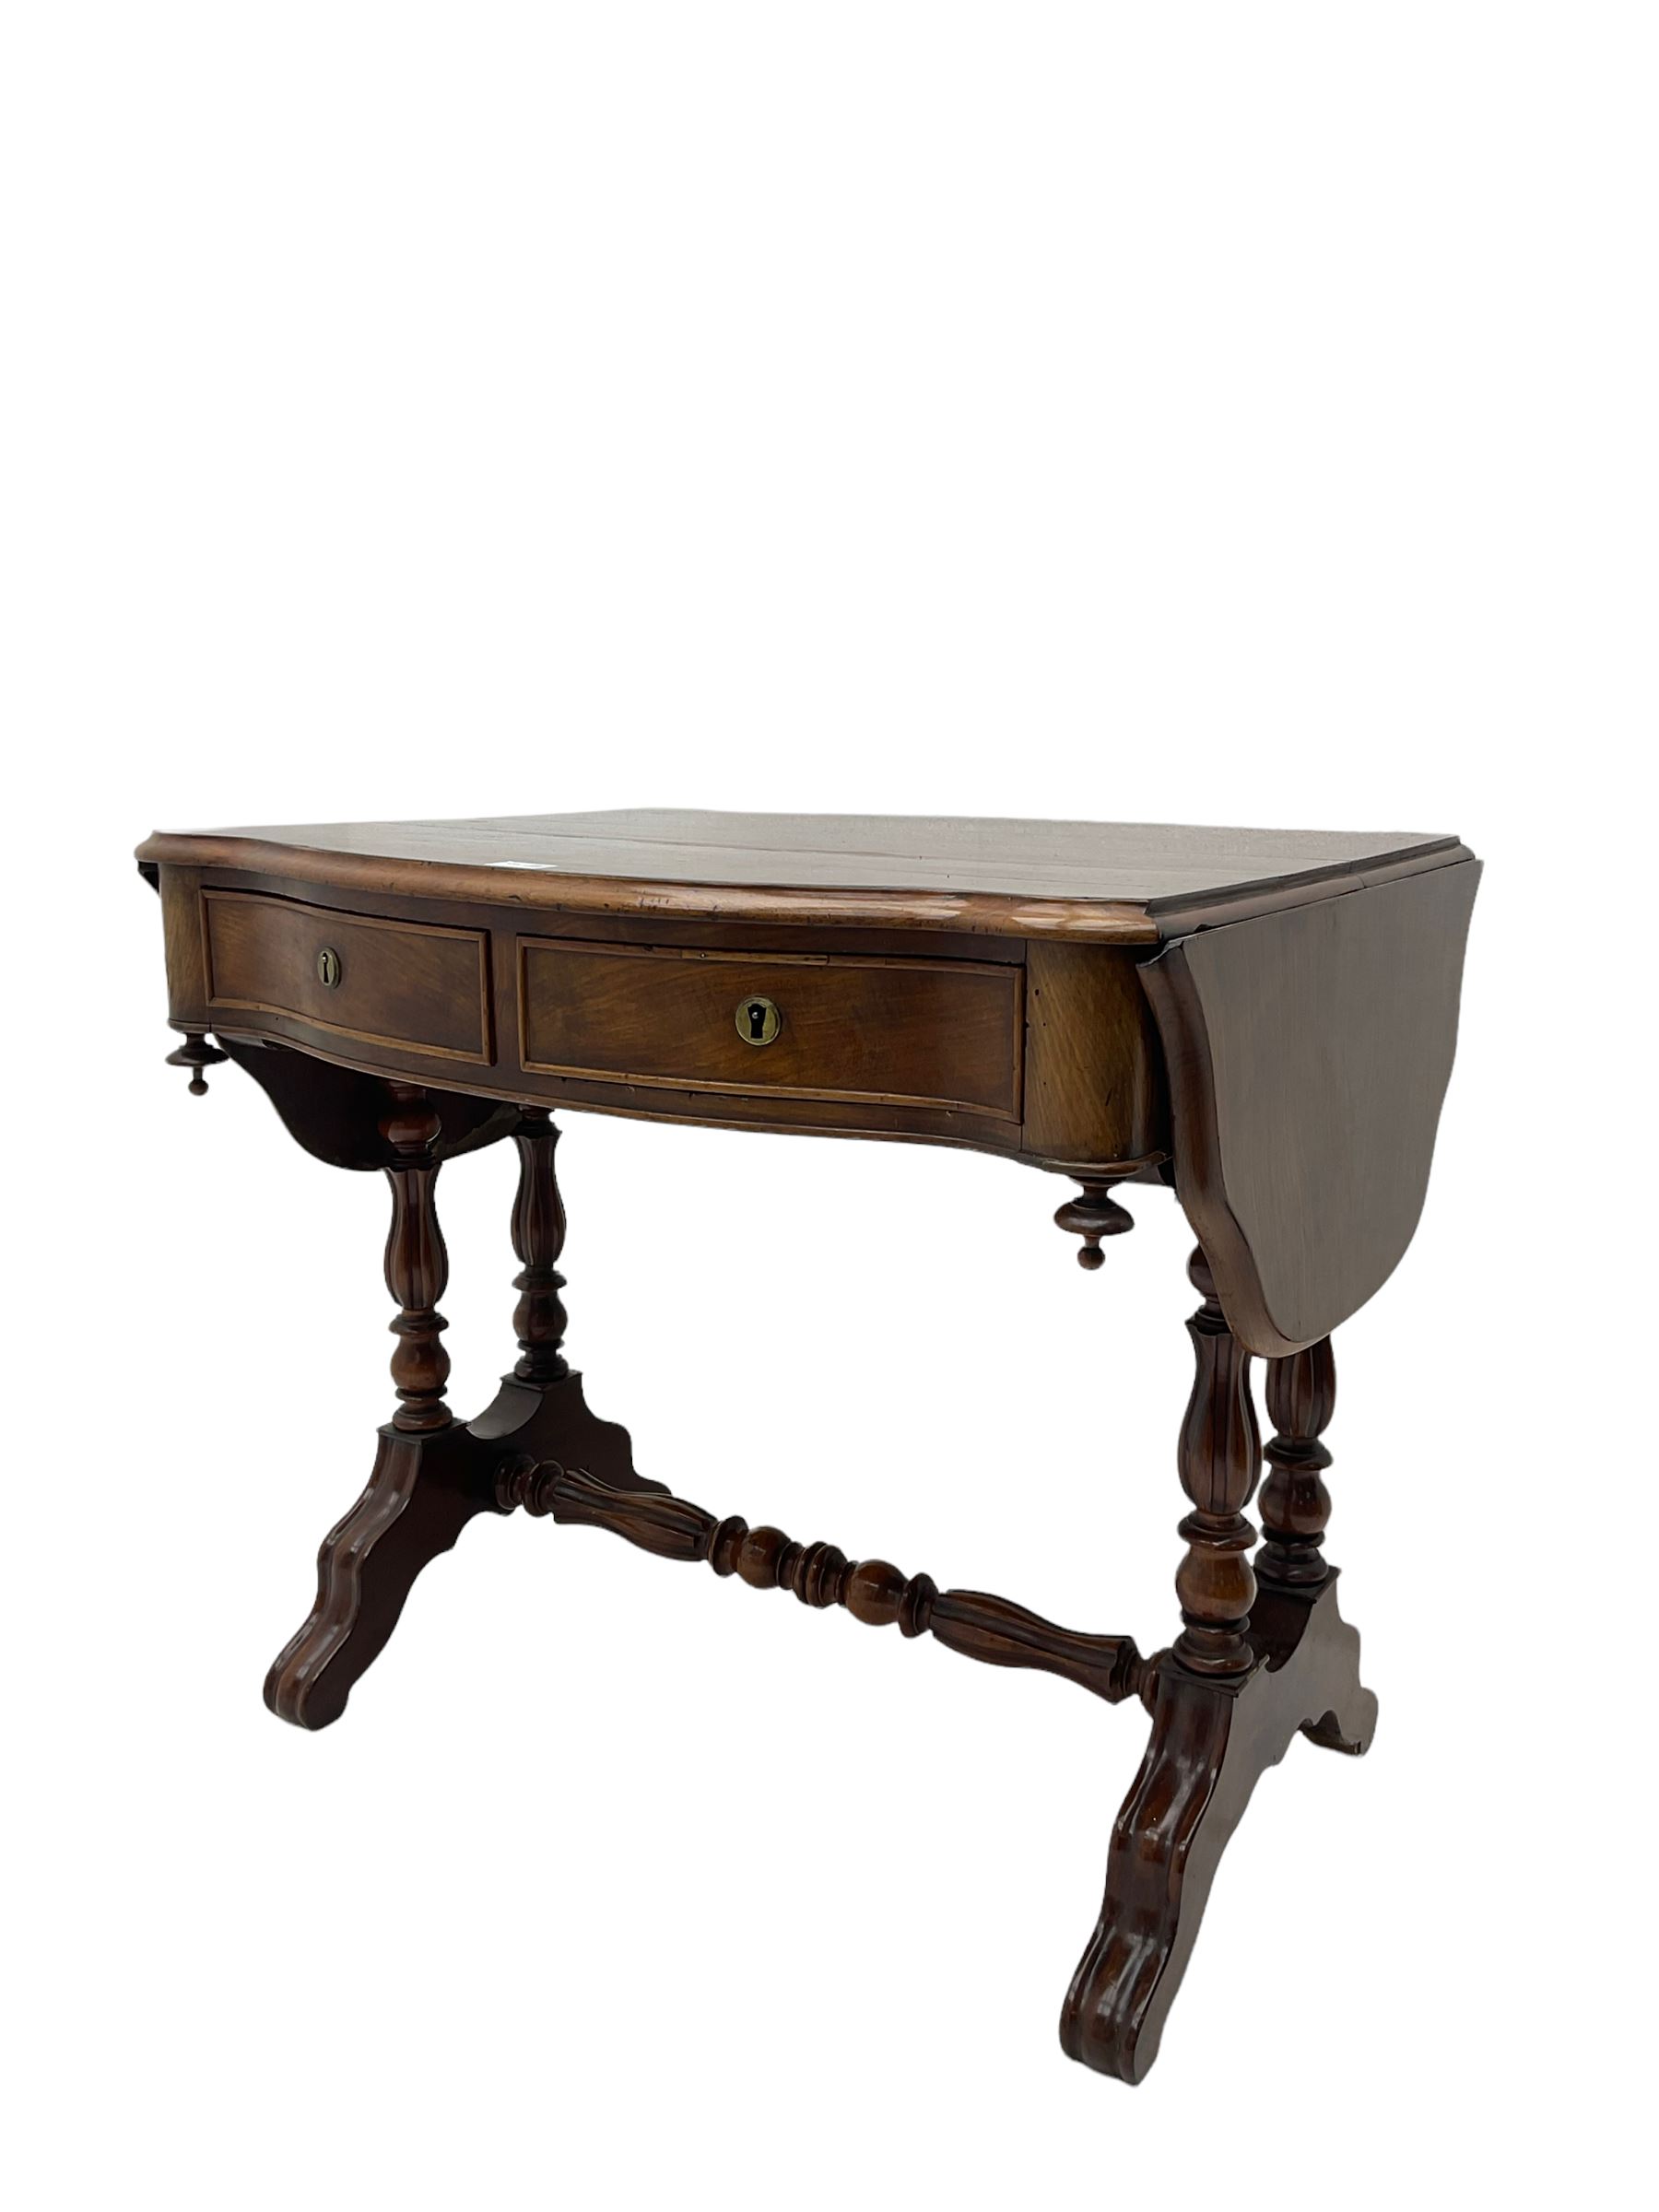 Victorian figured mahogany stretcher table - Image 3 of 7